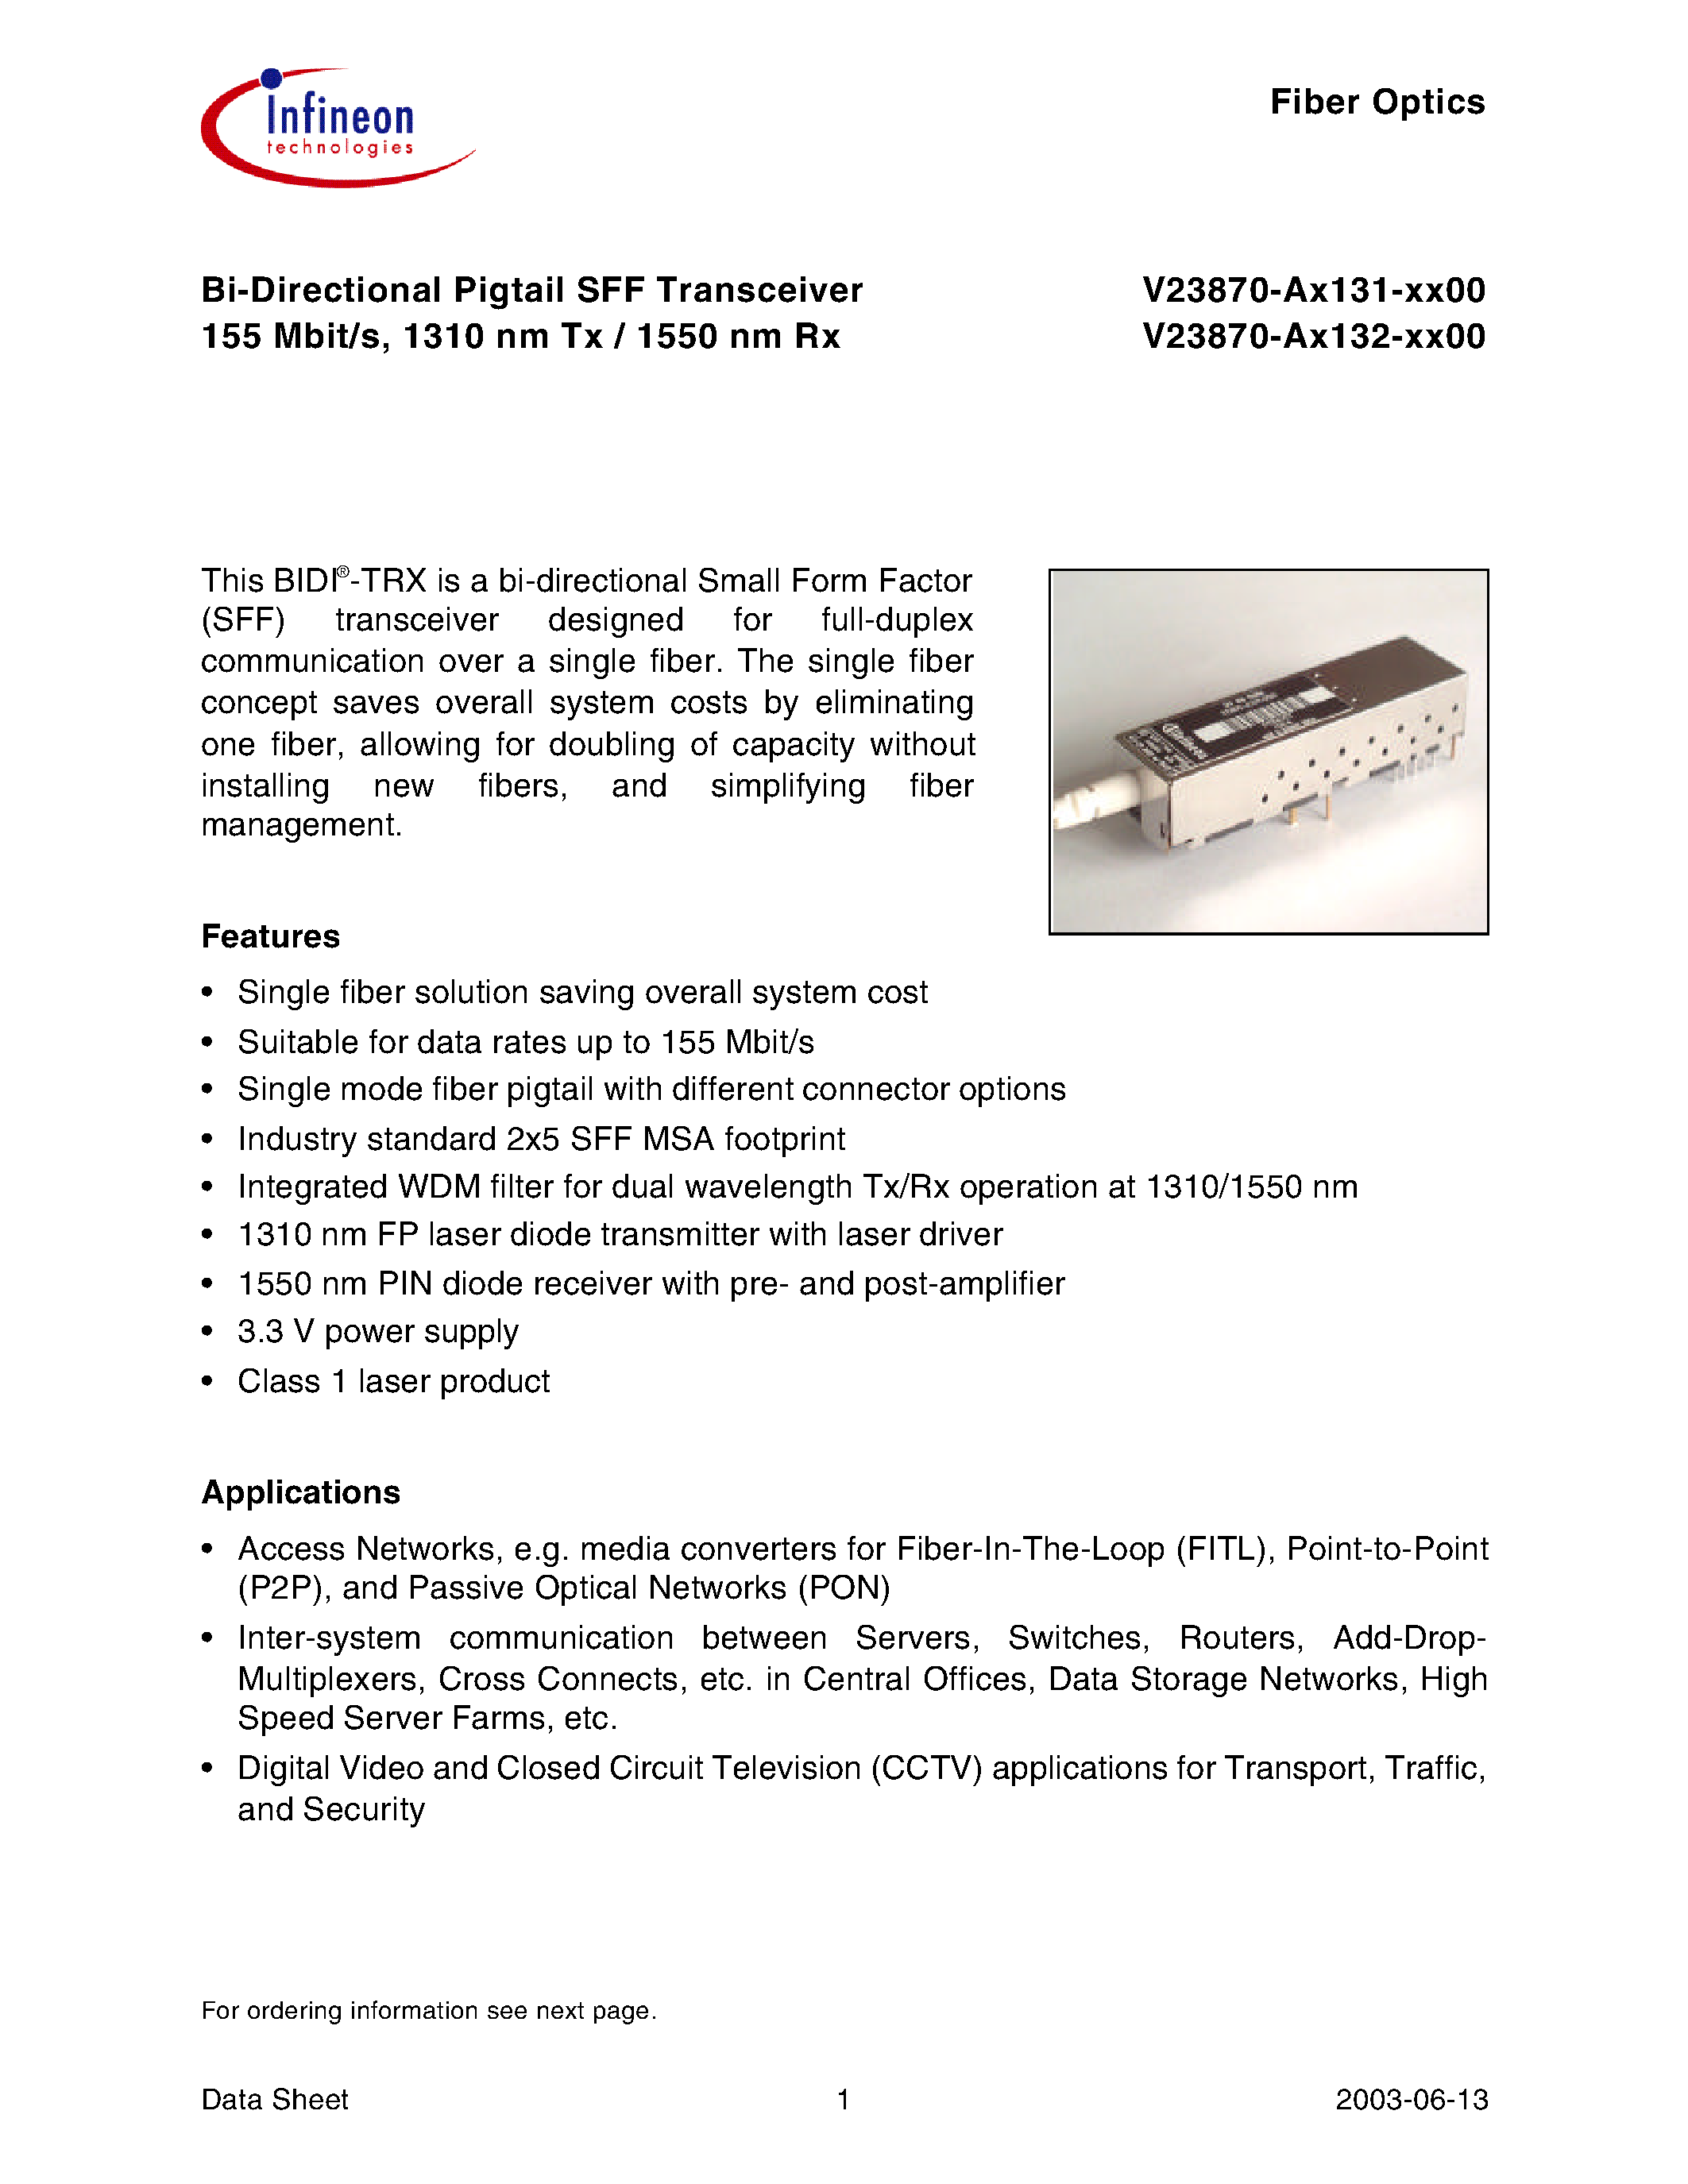 Datasheet V23870-A3132-H500 - Bi-Directional Pigtail SFF Transceiver 155 Mbit/s/ 1310 nm Tx / 1550 nm Rx page 1